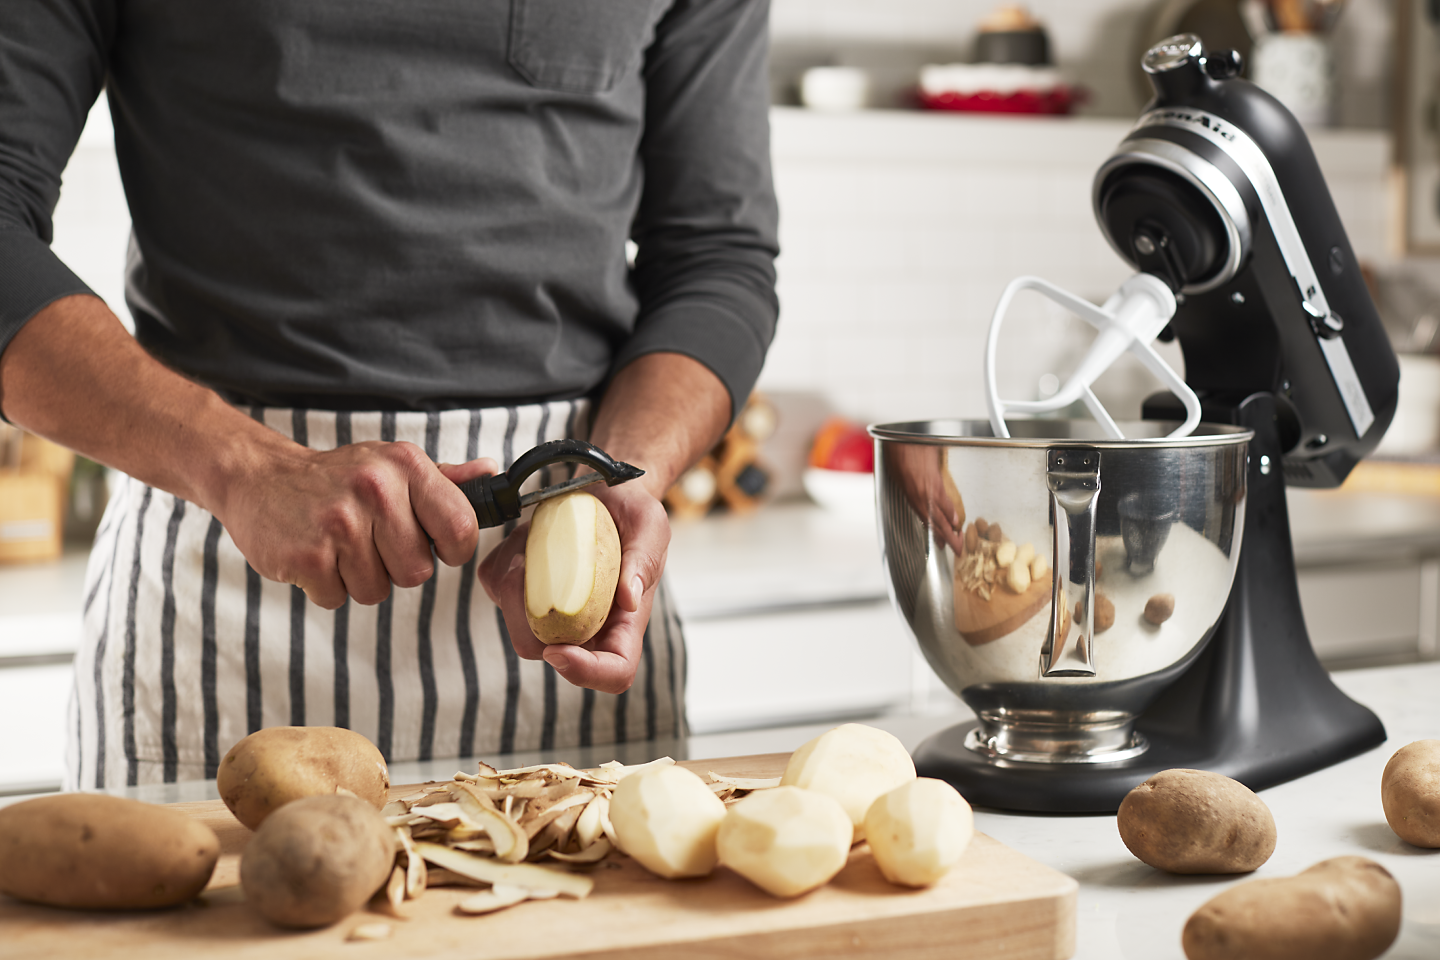 https://kitchenaid-h.assetsadobe.com/is/image/content/dam/business-unit/kitchenaid/en-us/marketing-content/site-assets/page-content/pinch-of-help/how-to-make-mashed-potatoes-with-a-stand-mixer/Mashed-Potato-Stand-Mixer_2.png?fmt=png-alpha&qlt=85,0&resMode=sharp2&op_usm=1.75,0.3,2,0&scl=1&constrain=fit,1